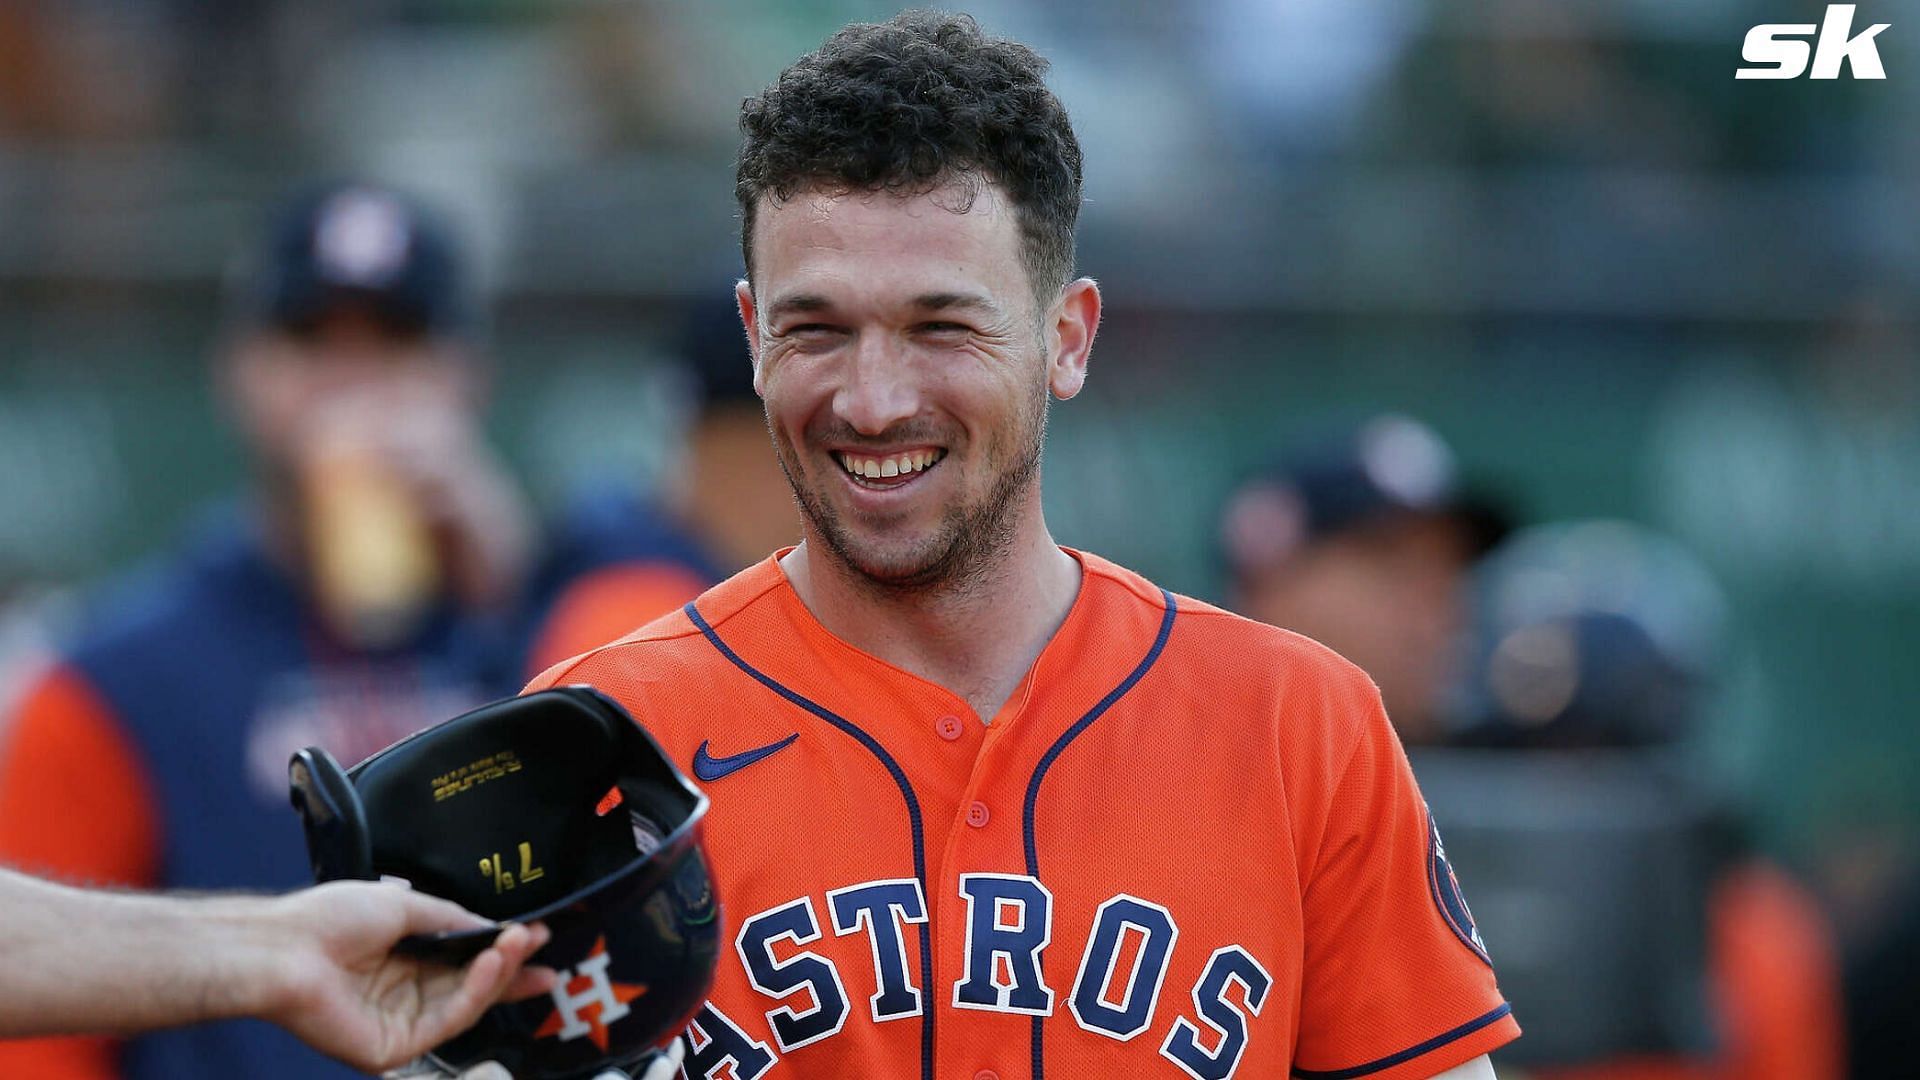 RIP to the Astros' Alex Bregman's deleted Twitter account